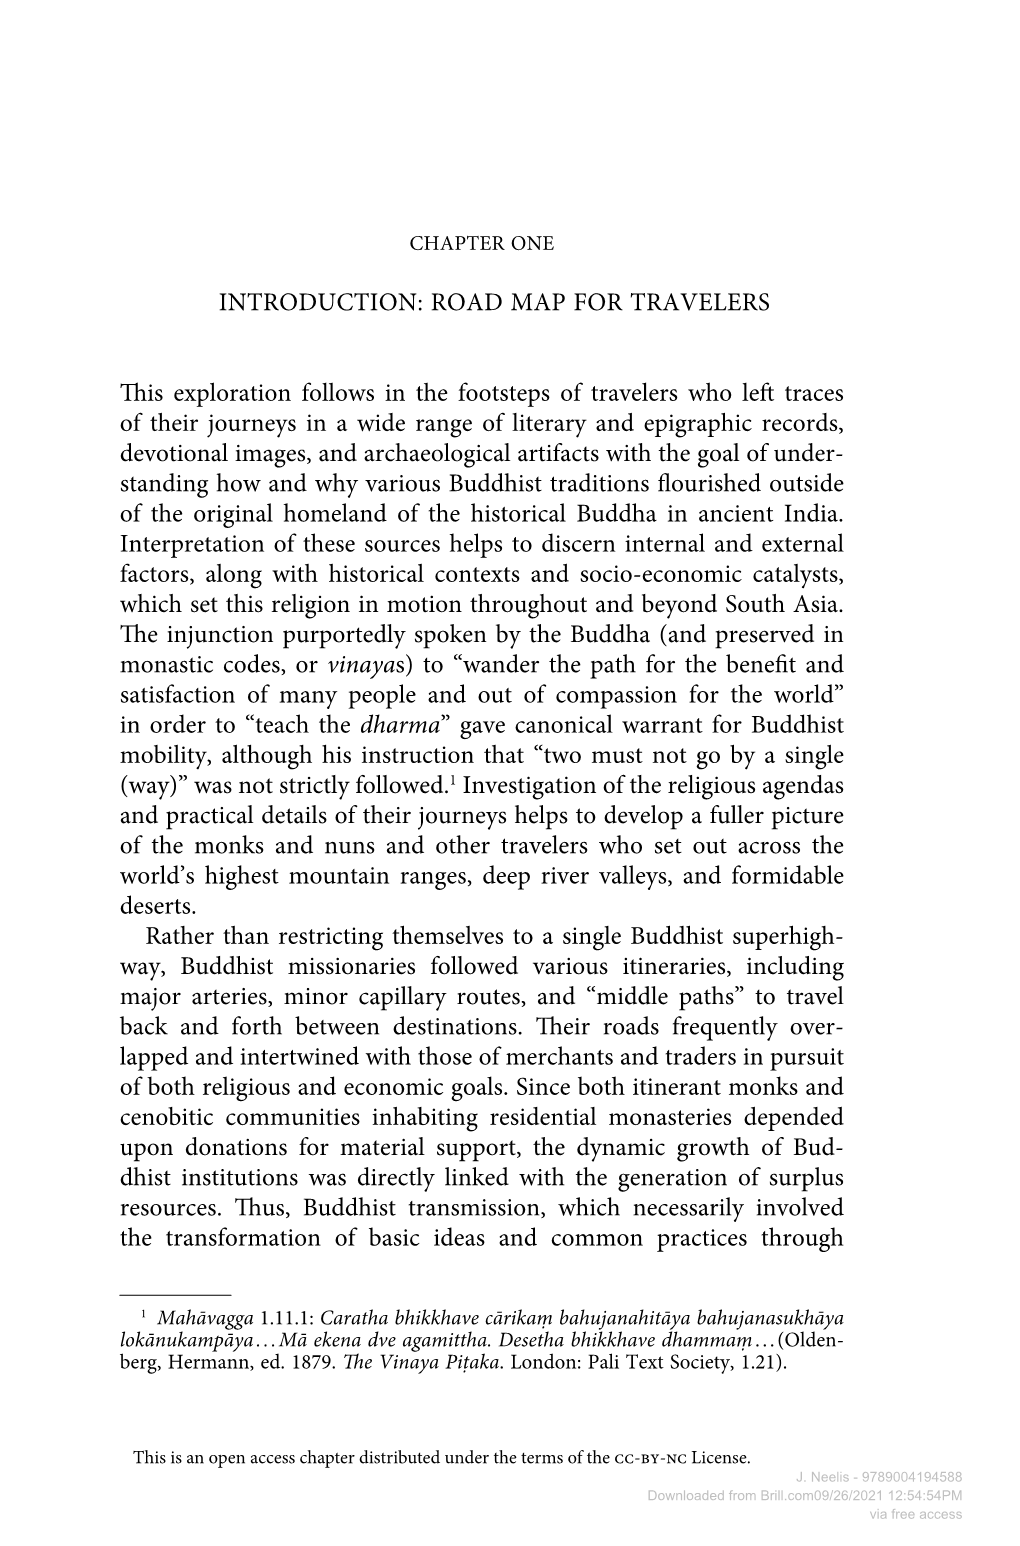 Introduction: Road Map for Travelers